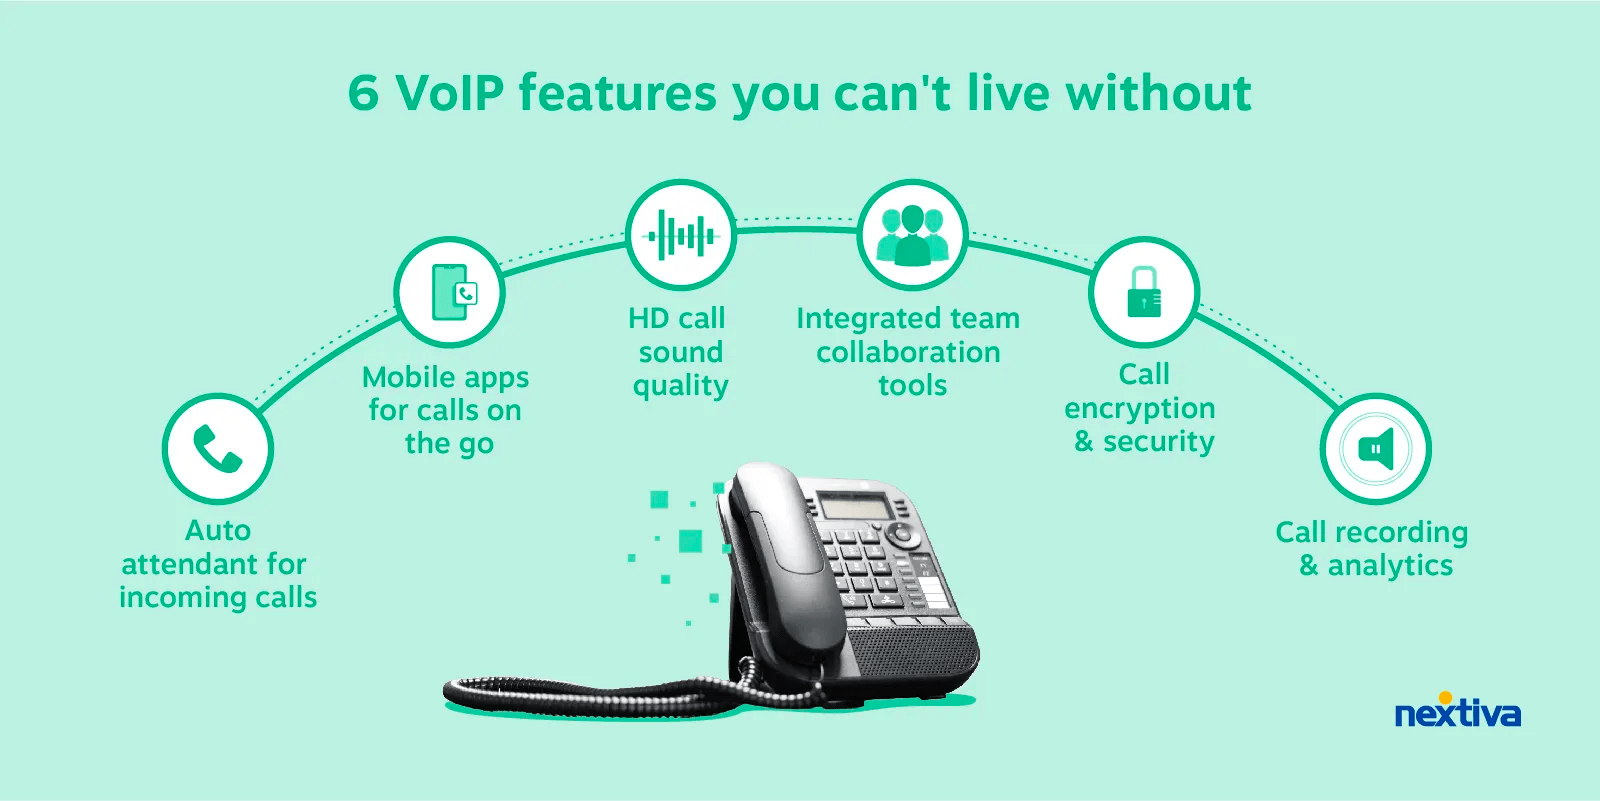 VoIP features to look for